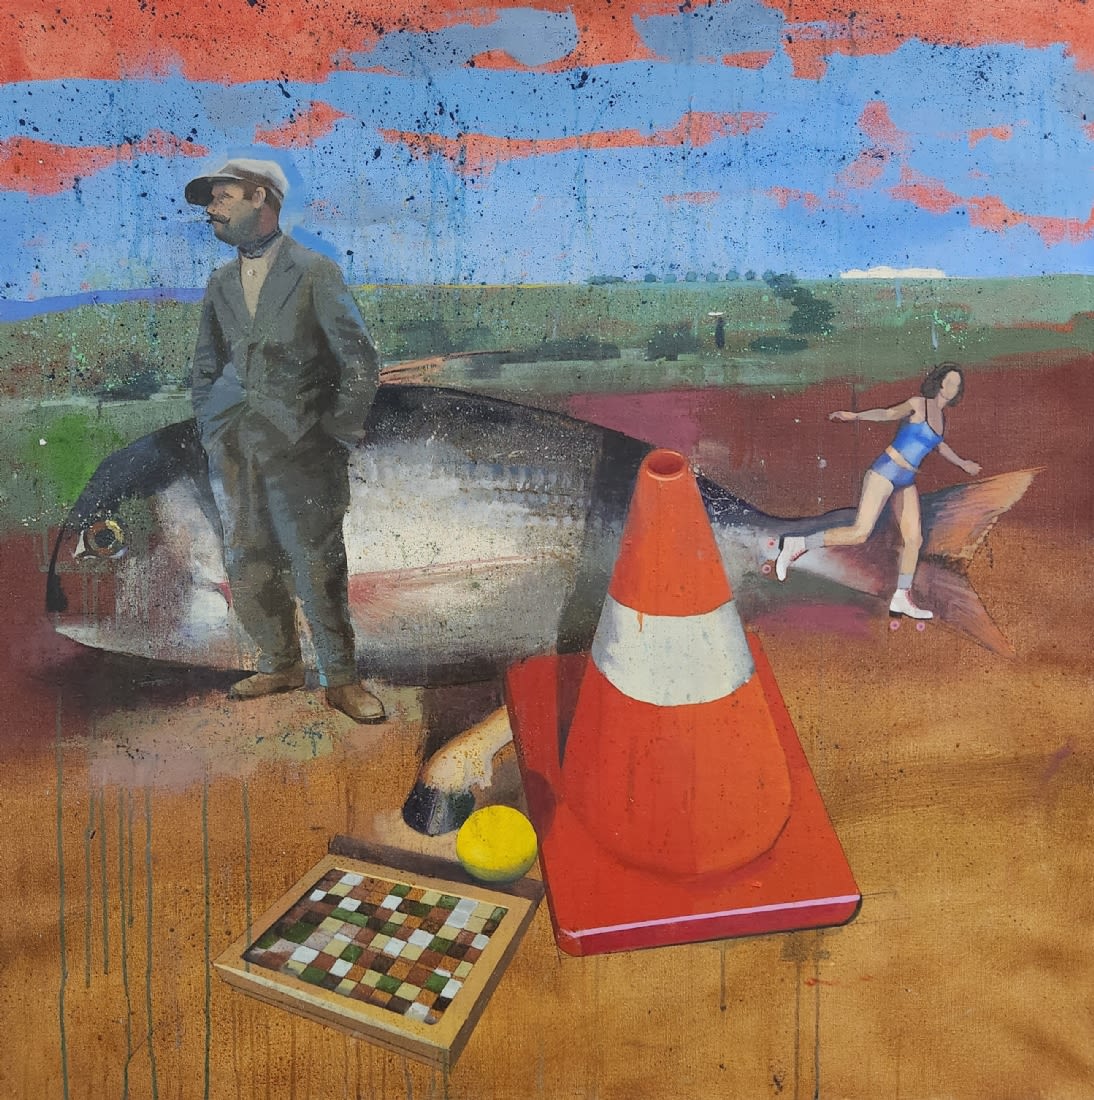 'Man and Fish' - painting, kobi Shahar - oil on canvas, signed. Dimensions: 90x91 cm. The artist